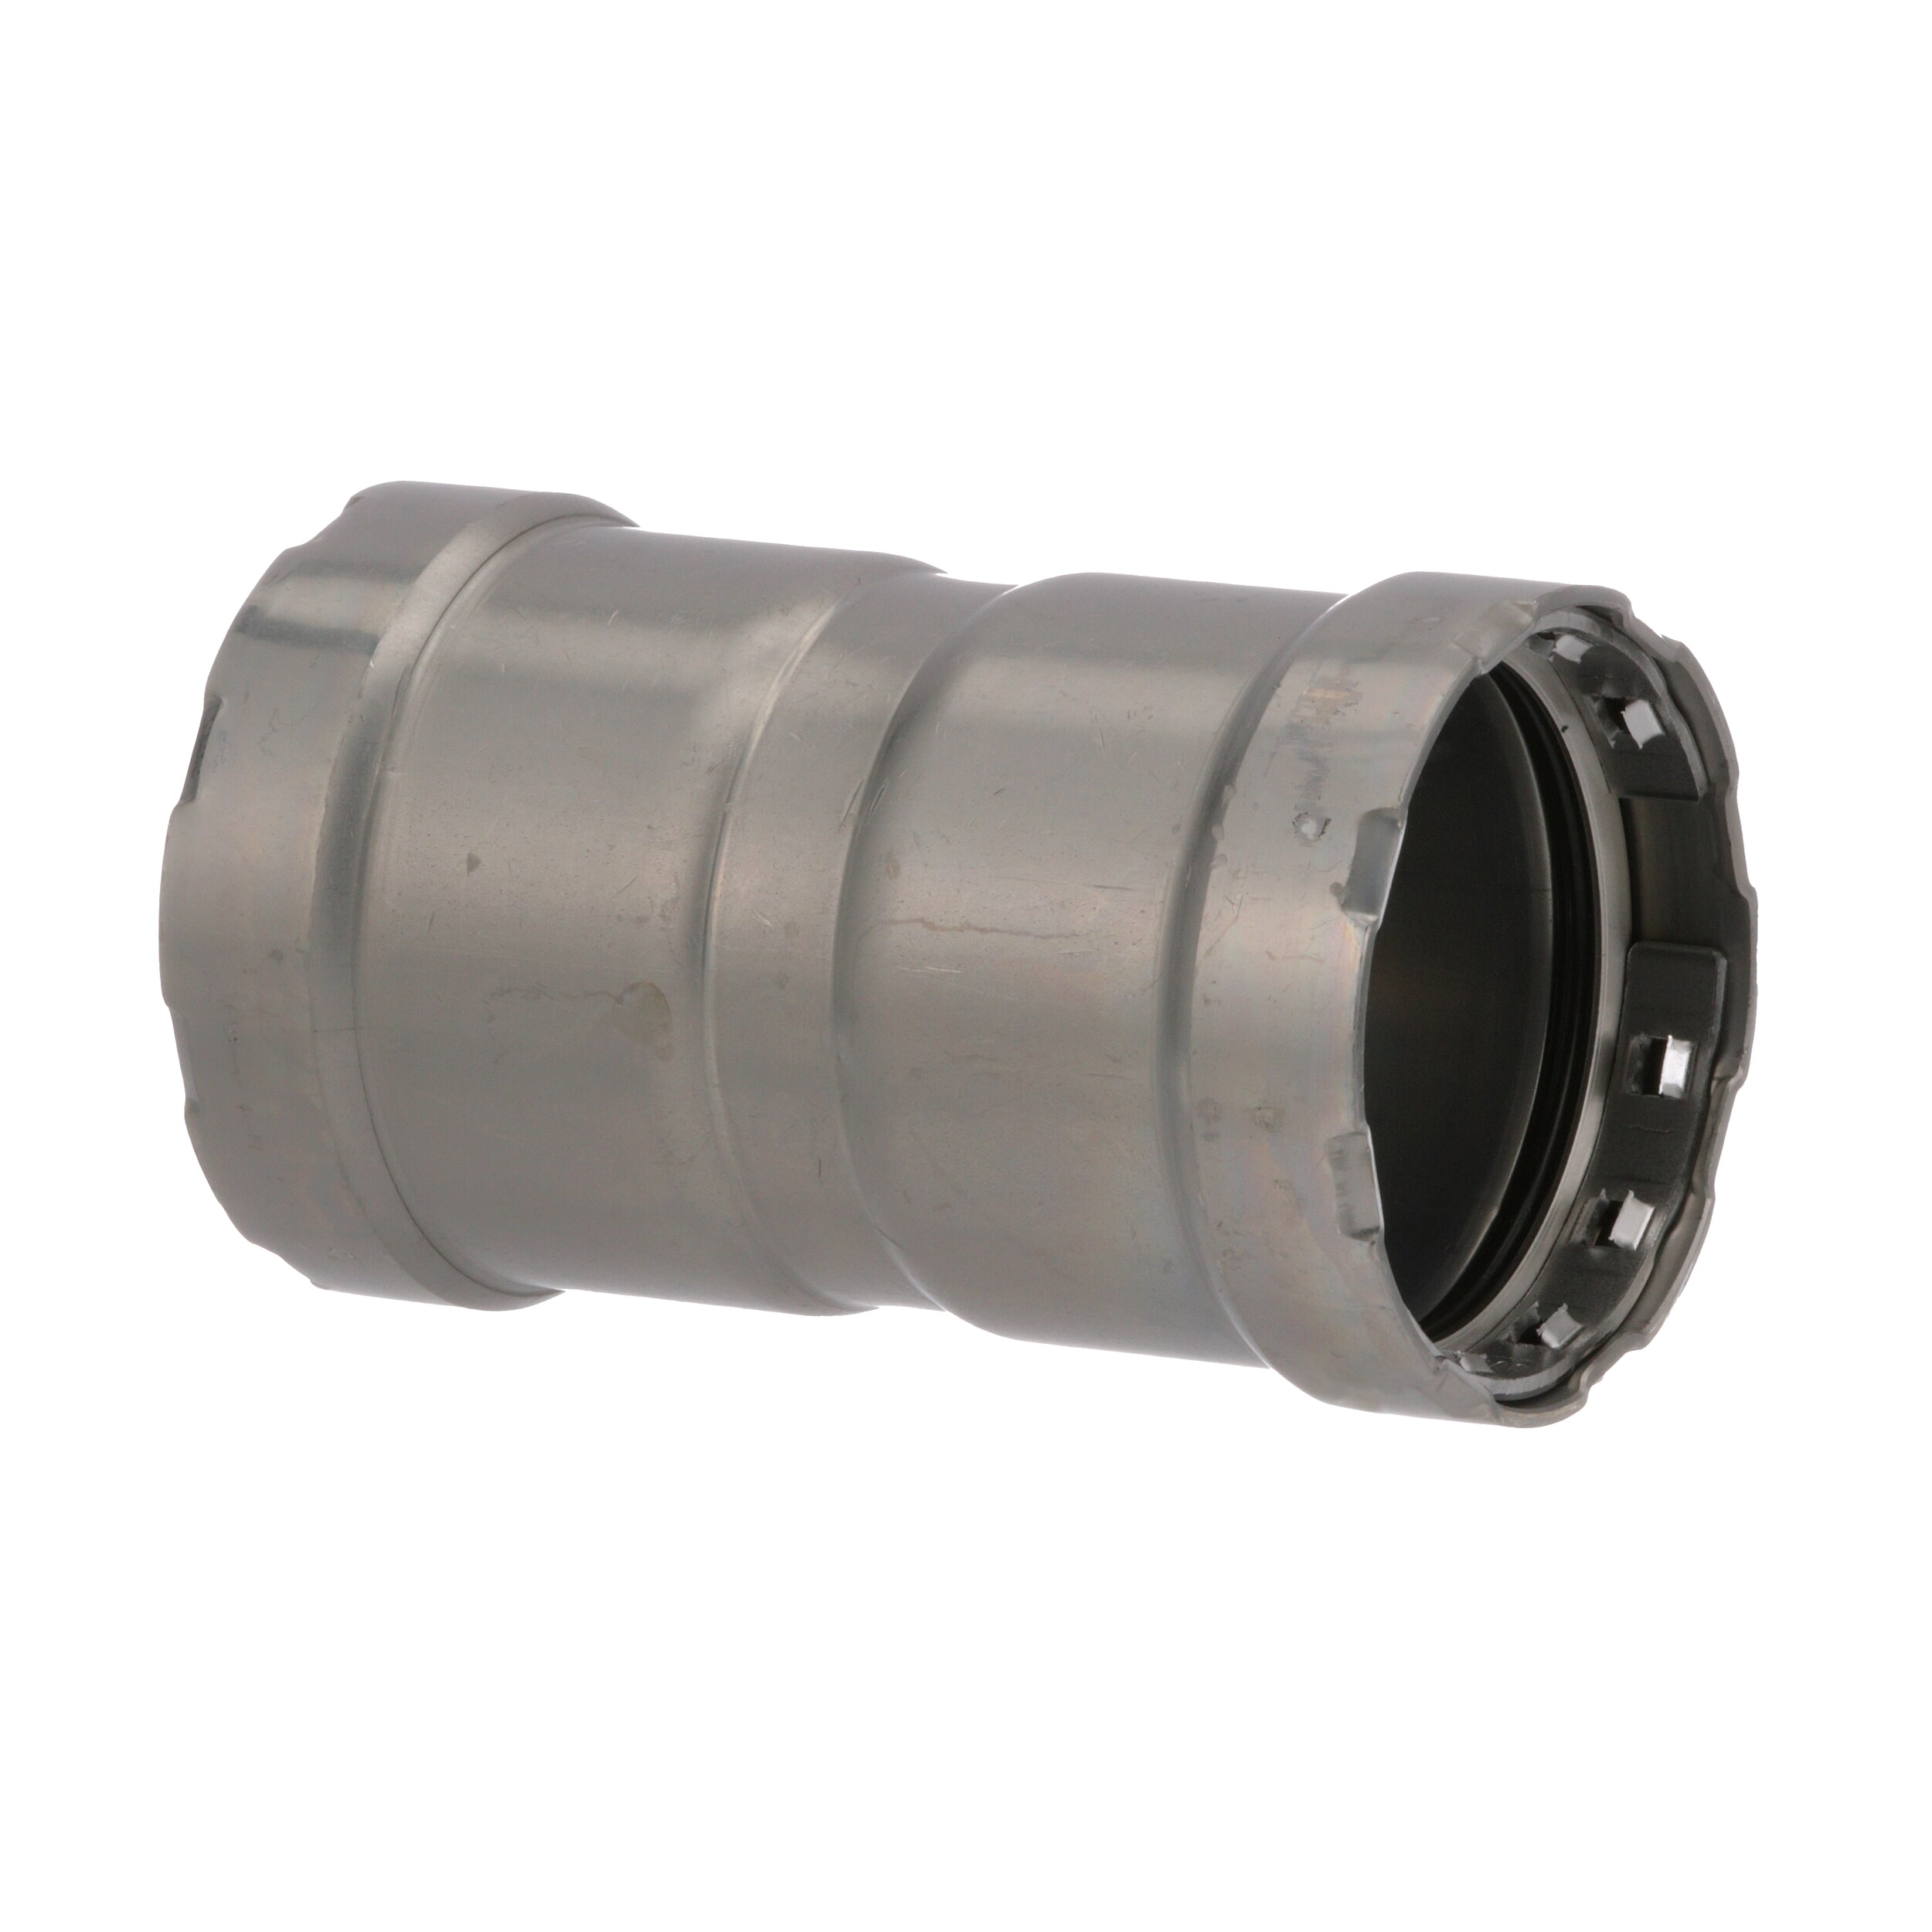 MegaPress® 25025 Pipe Coupling With Stop, 2 in Nominal, Press End Style, Carbon Steel